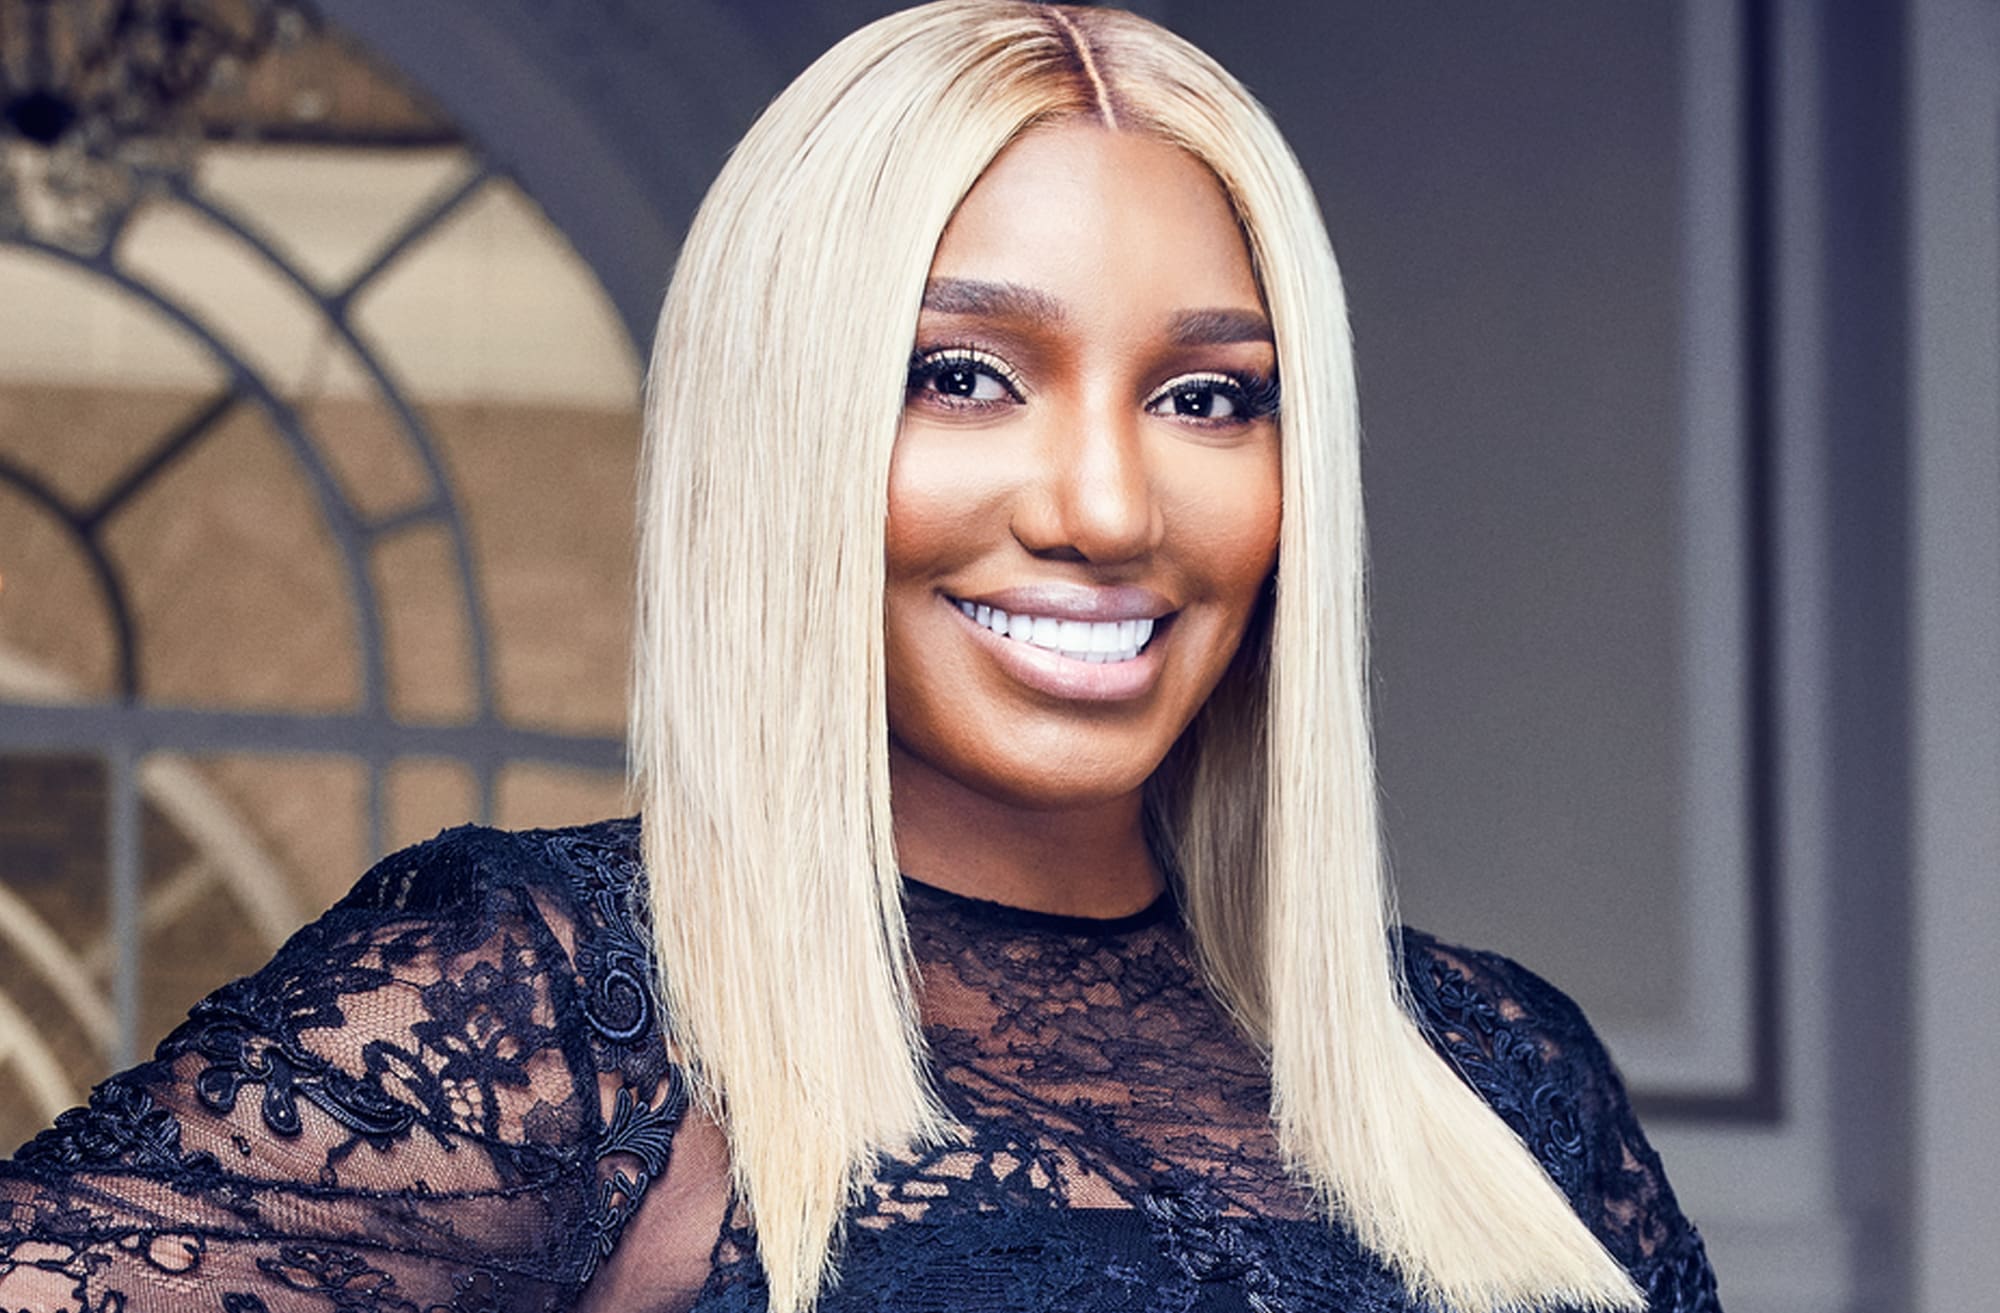 nene-leakes-is-spending-her-holidays-with-her-new-boo